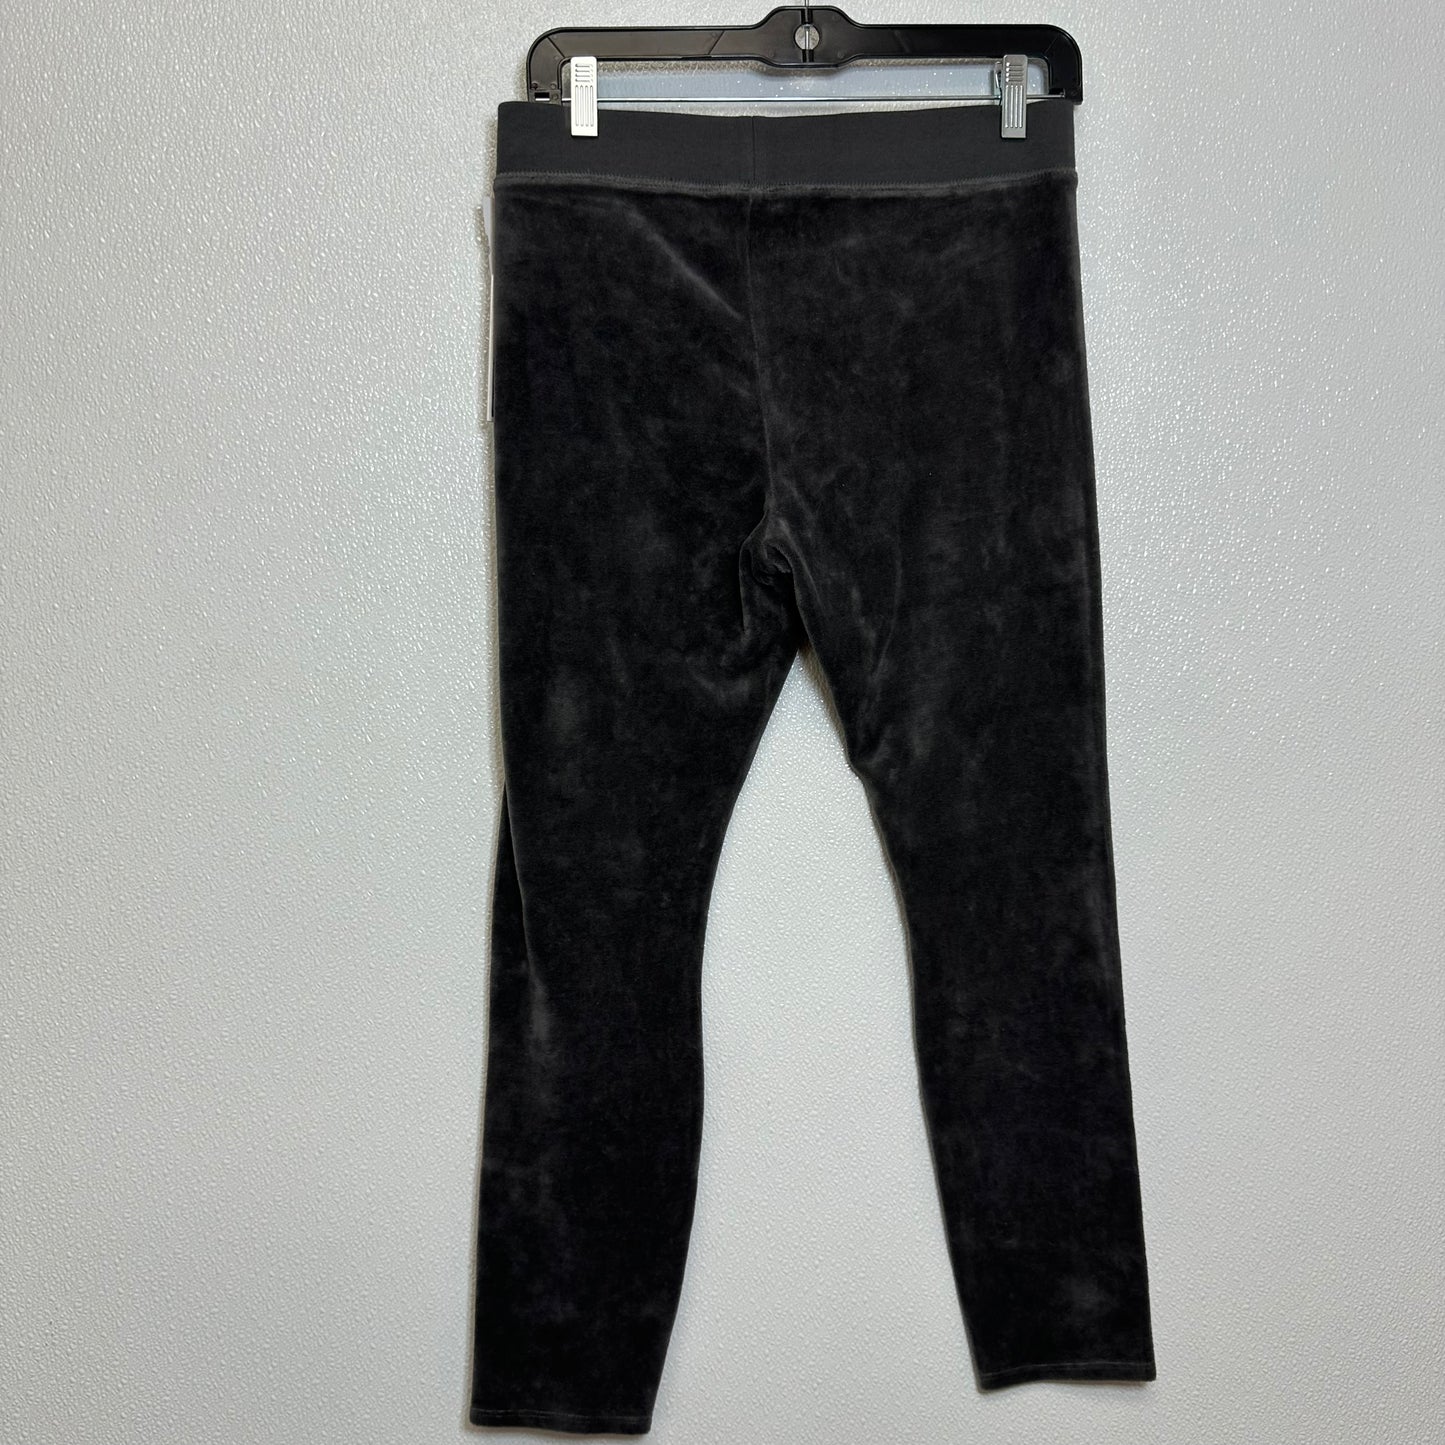 Athletic Pants By Juicy Couture  Size: M